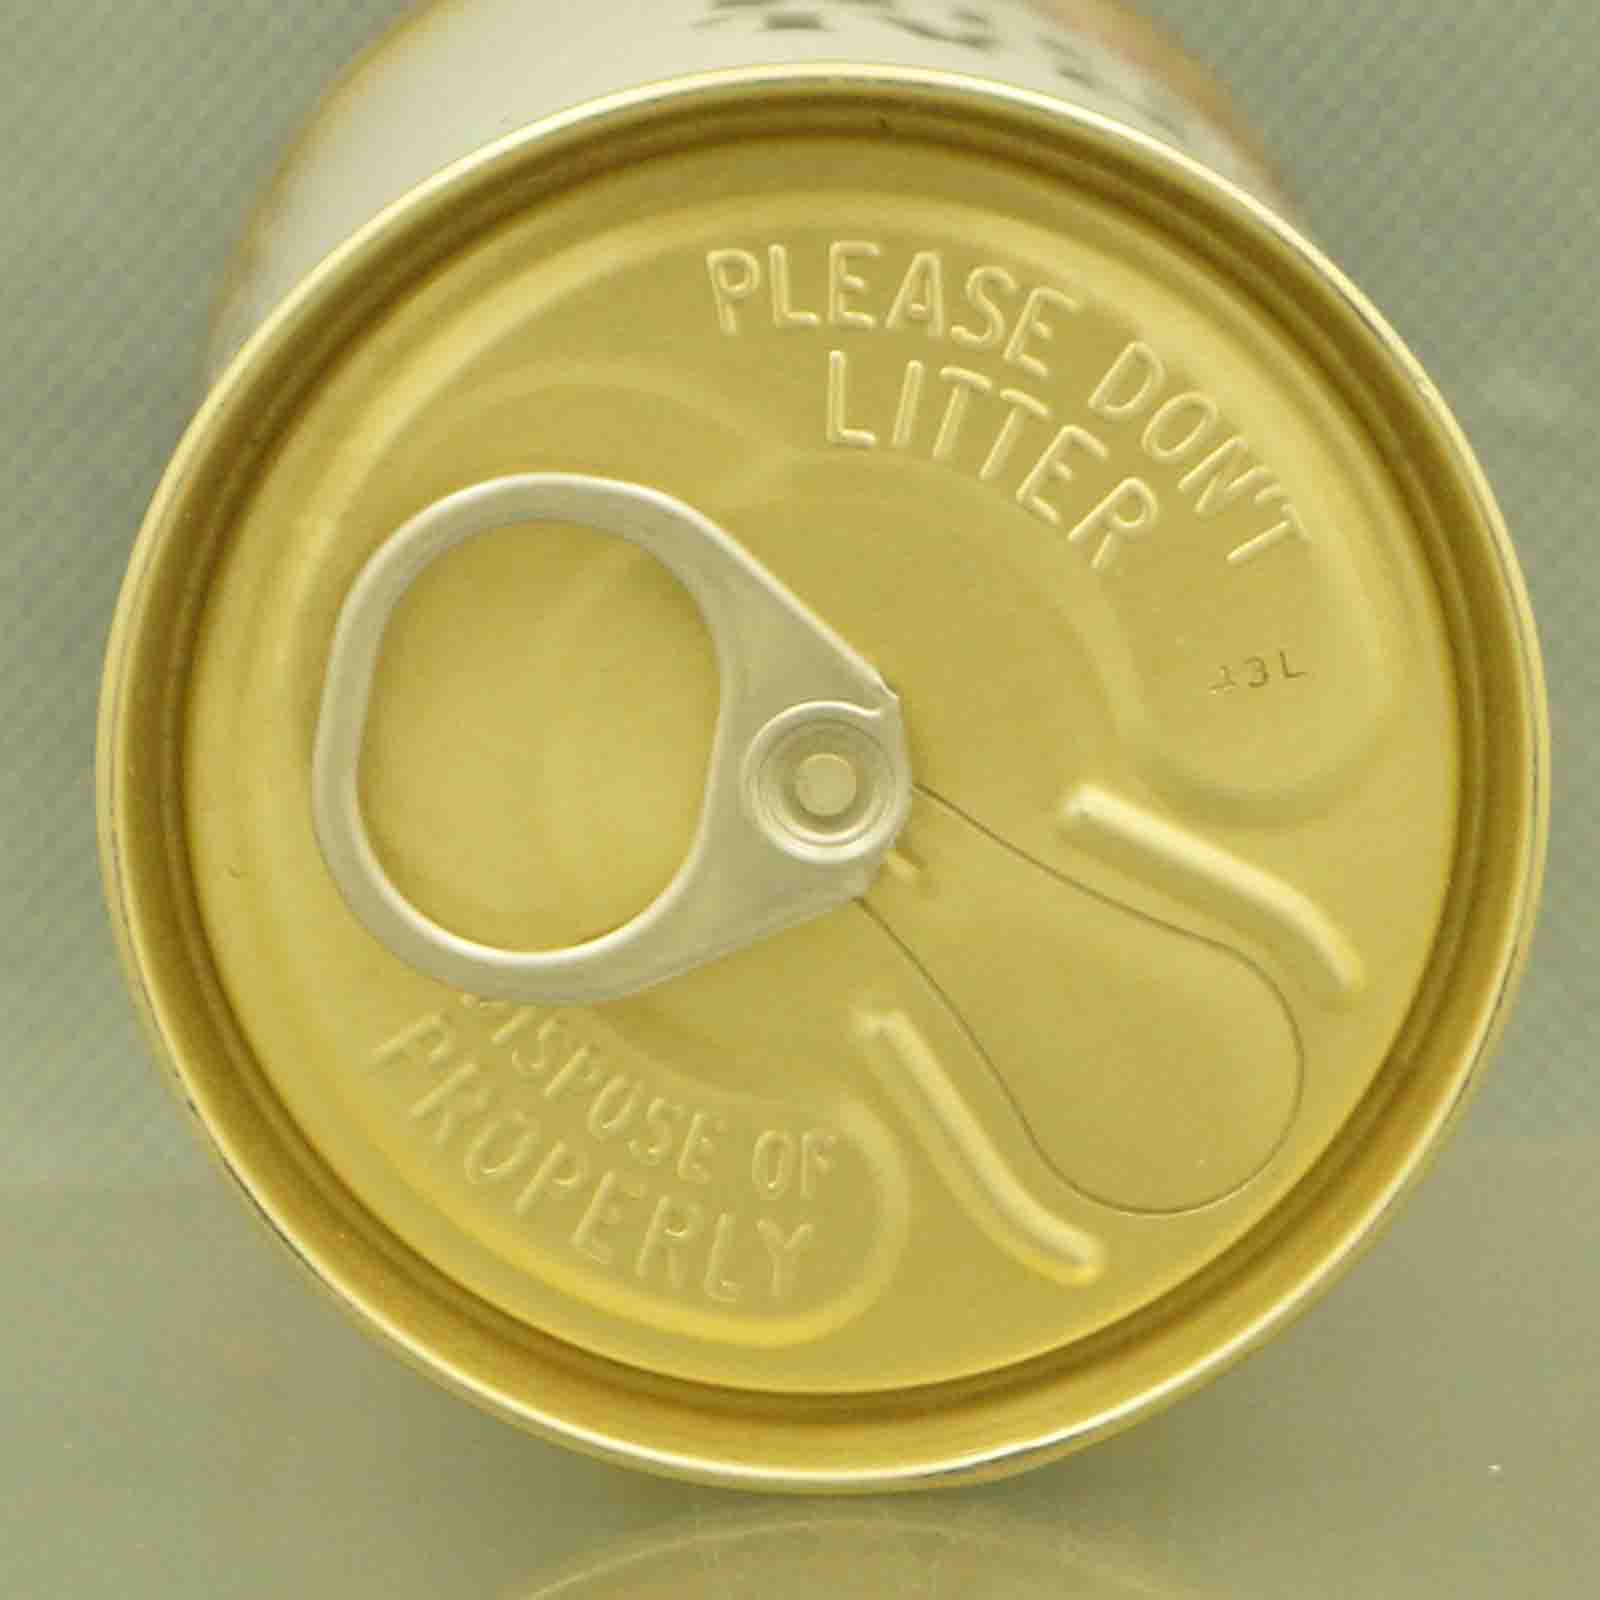 national premium 97-23 pull tab beer can 5